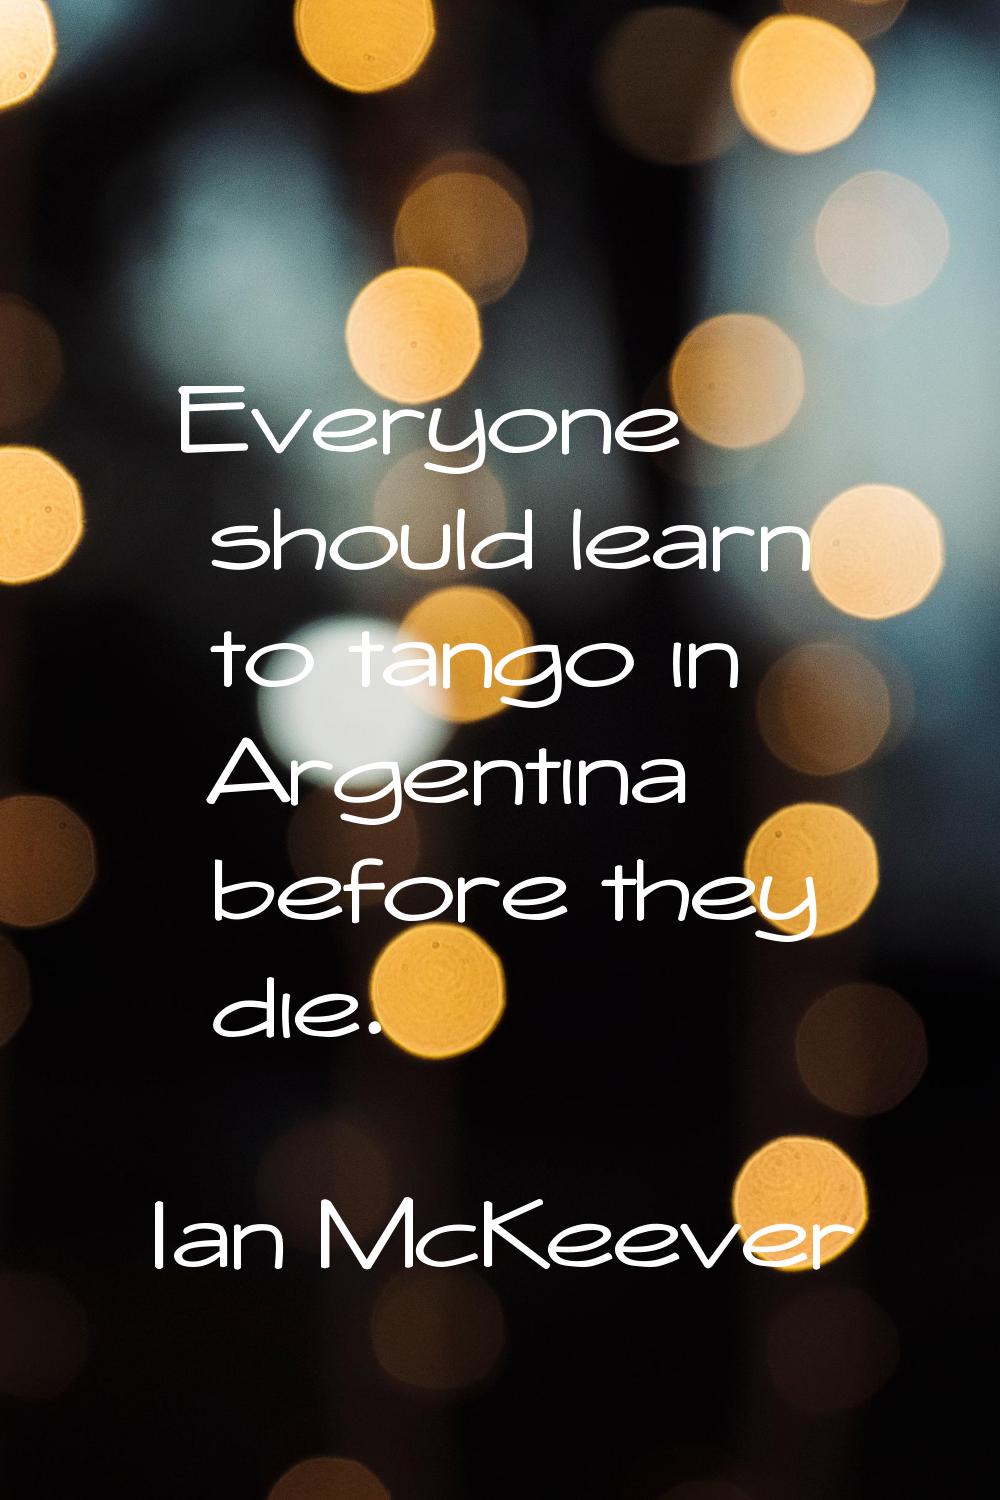 Everyone should learn to tango in Argentina before they die.